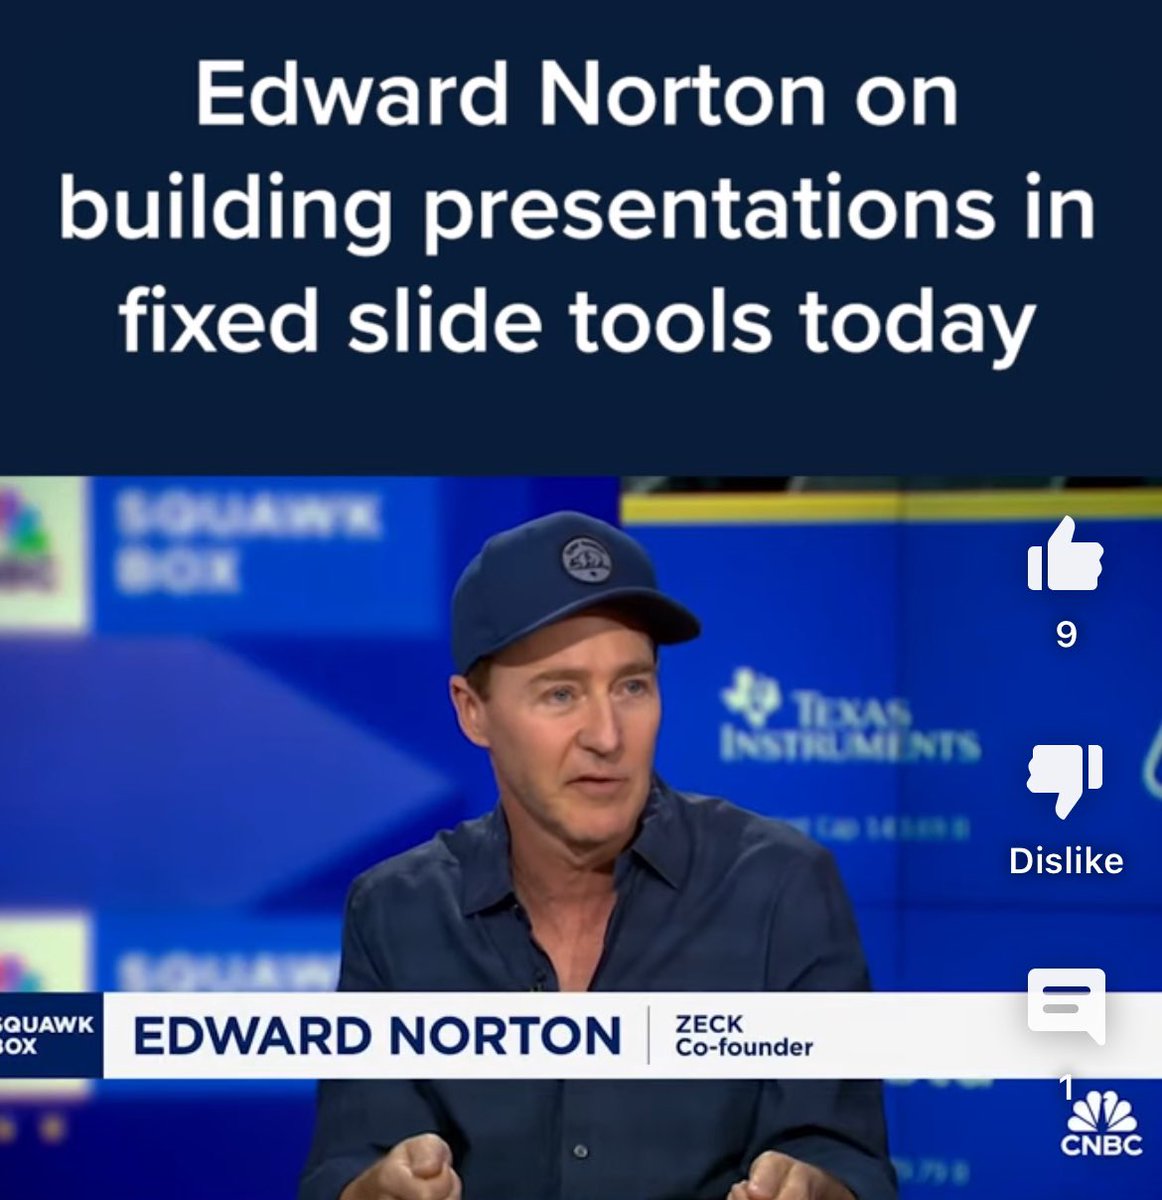 If you’re having a bad day, please remember that @EdwardNorton went from being Tyler Durden’s alter ego, the incredible Hulk, and King Baldwin to some guy selling a better version of PowerPoint and PDF.
Why? Well might never know.